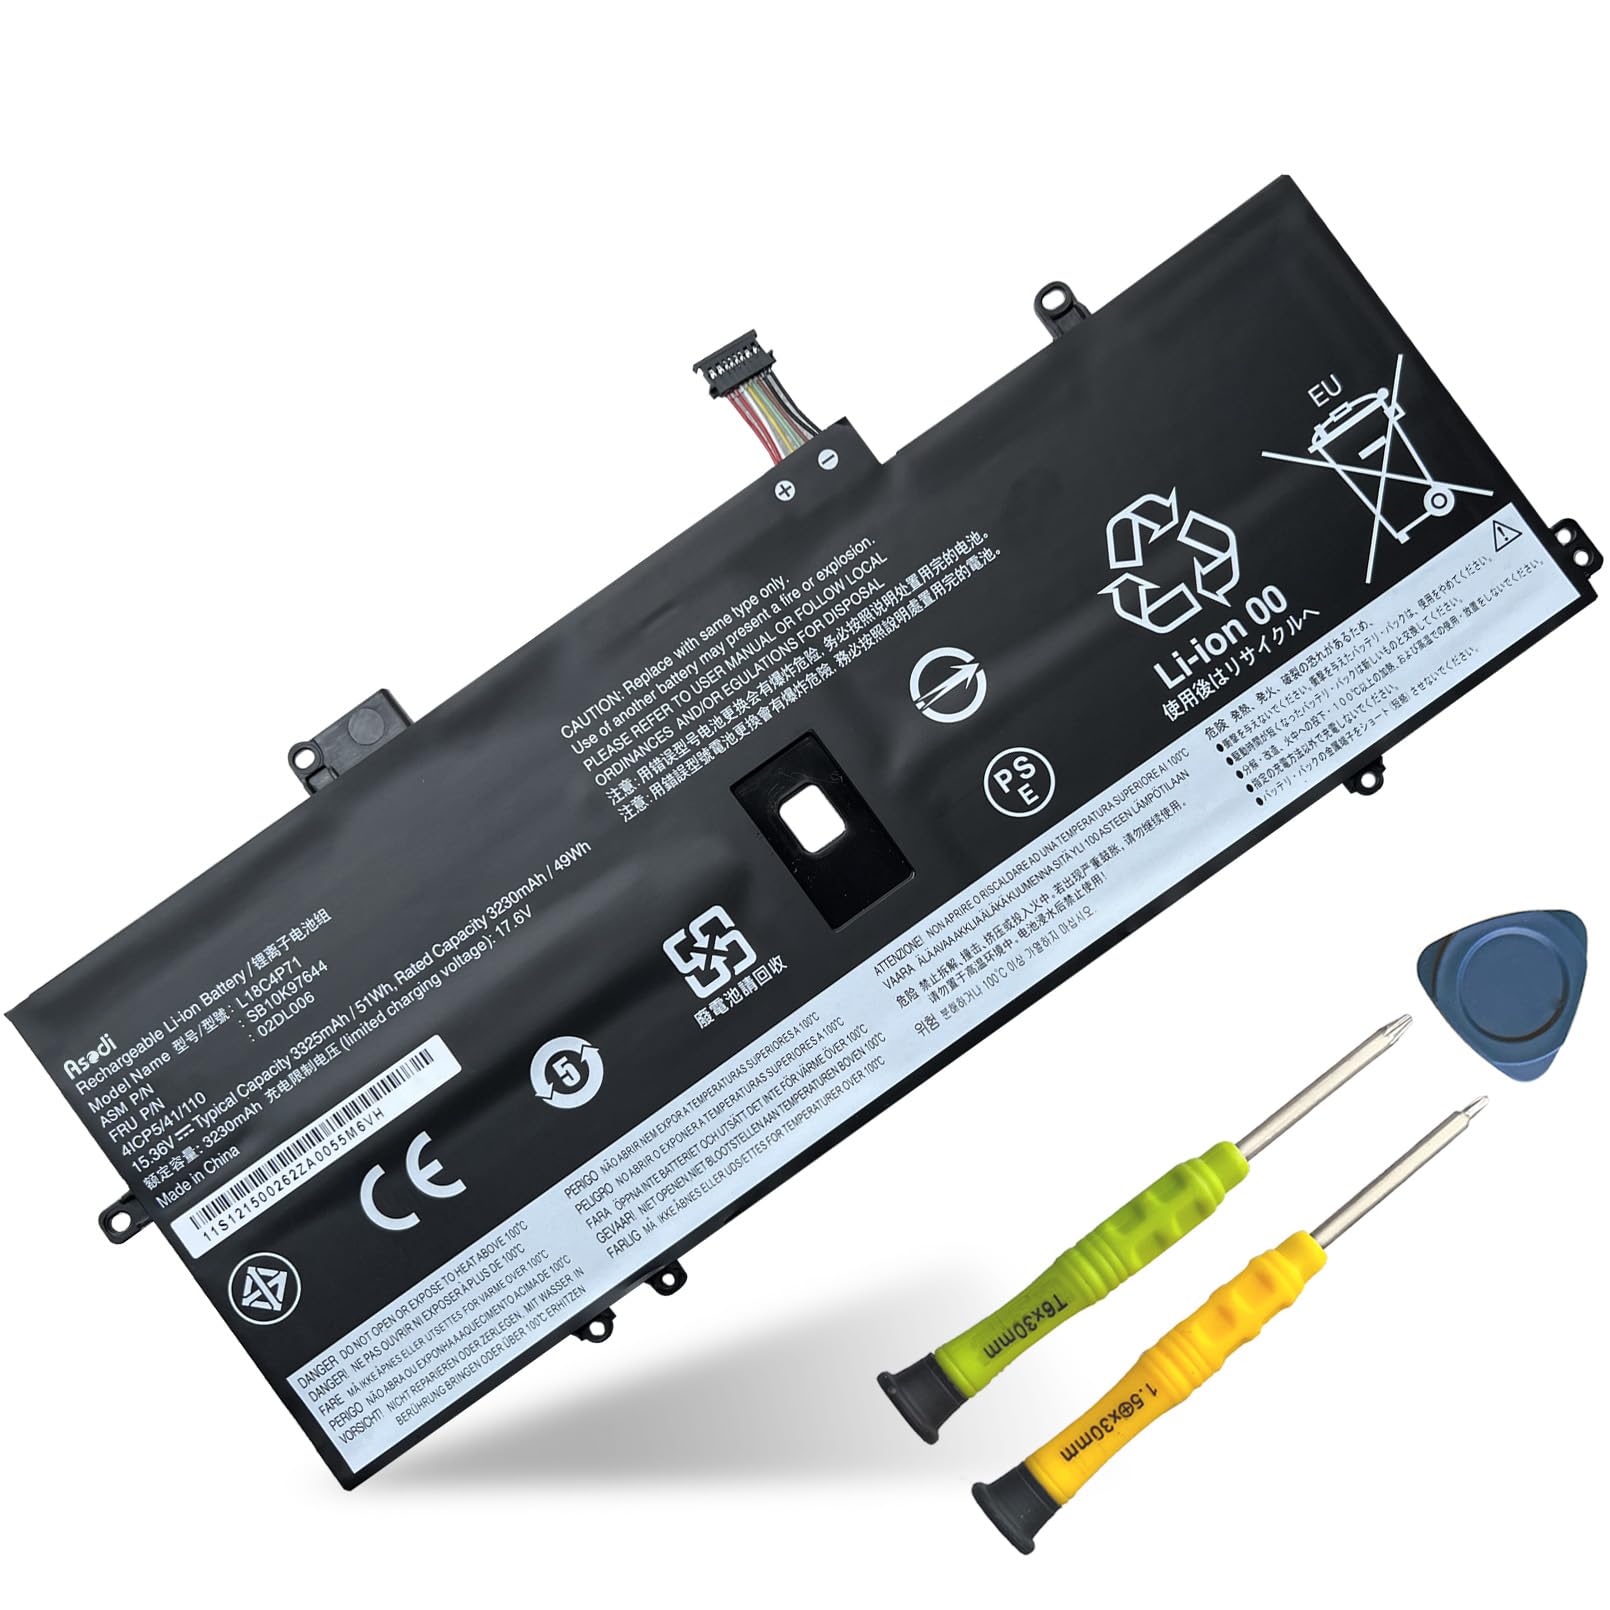 ASODI L18C4P71 02DL006 Laptop Battery Compatible with ThinkPad X1